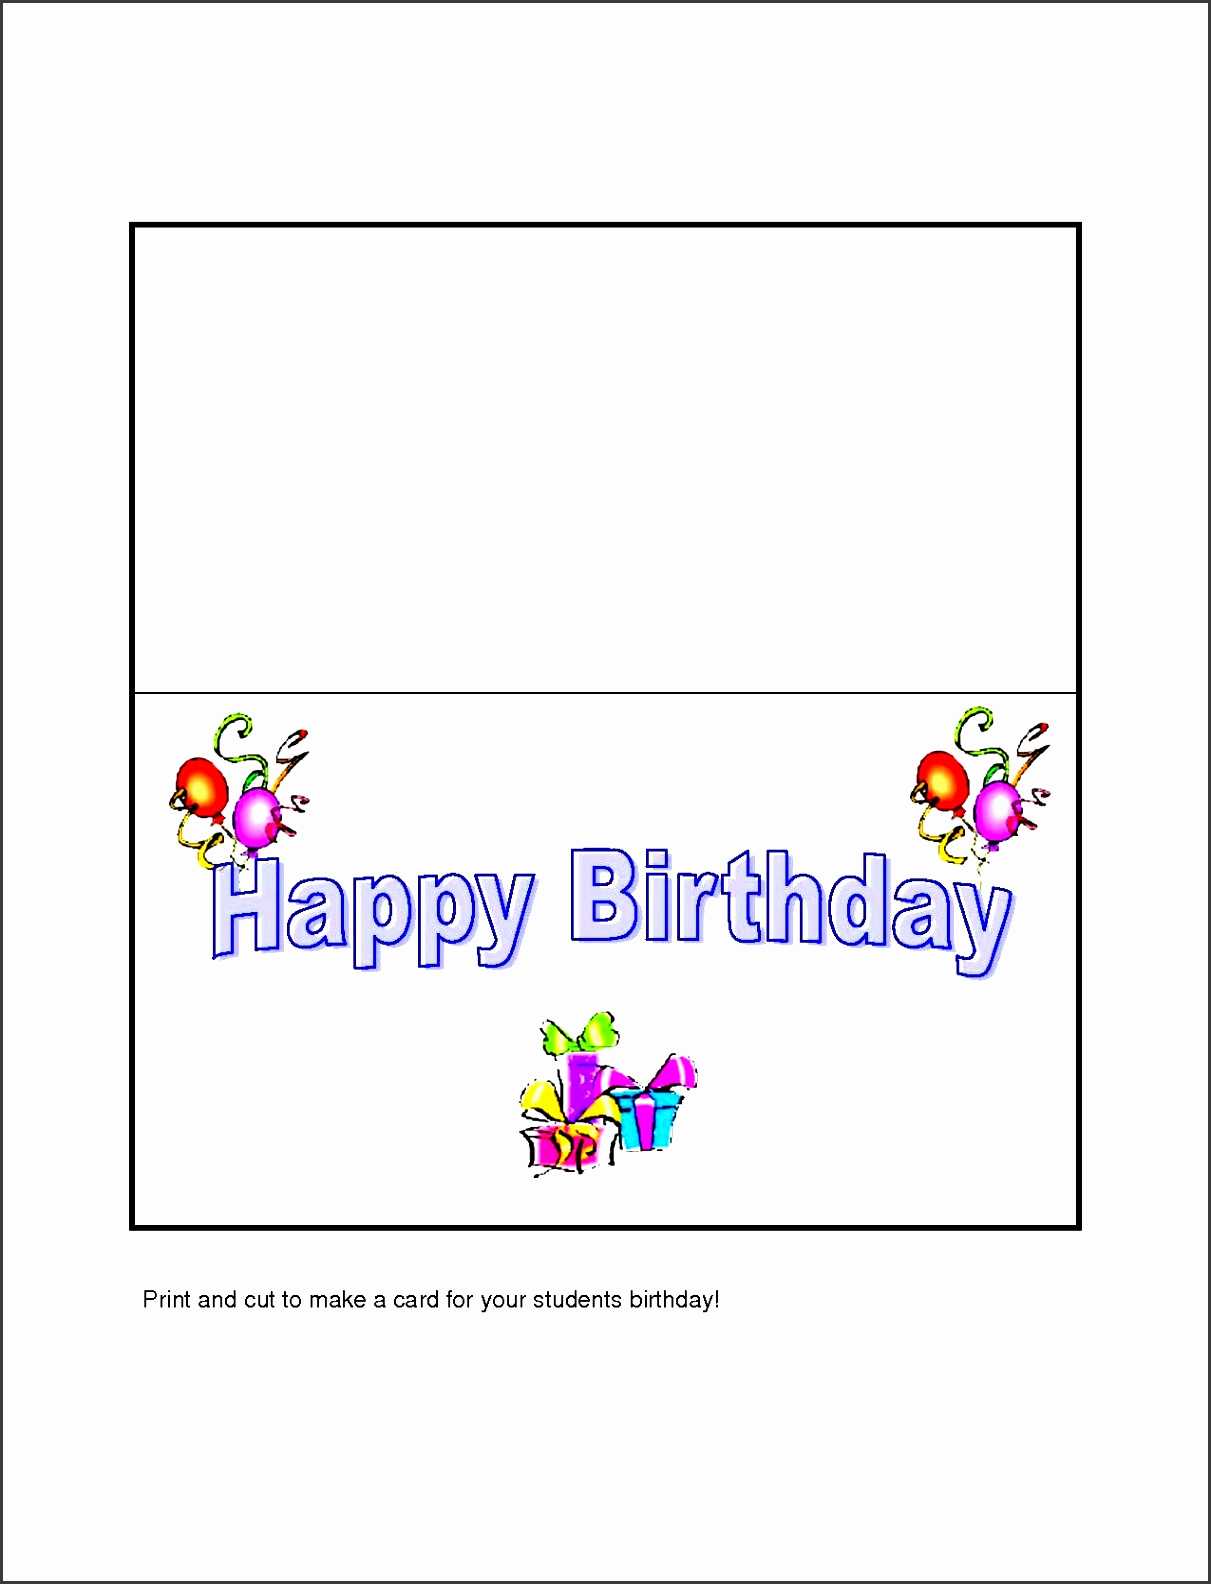 Beautiful 10 Free Microsoft Word Greeting Card Templates Intended For Microsoft Word Birthday Card Template